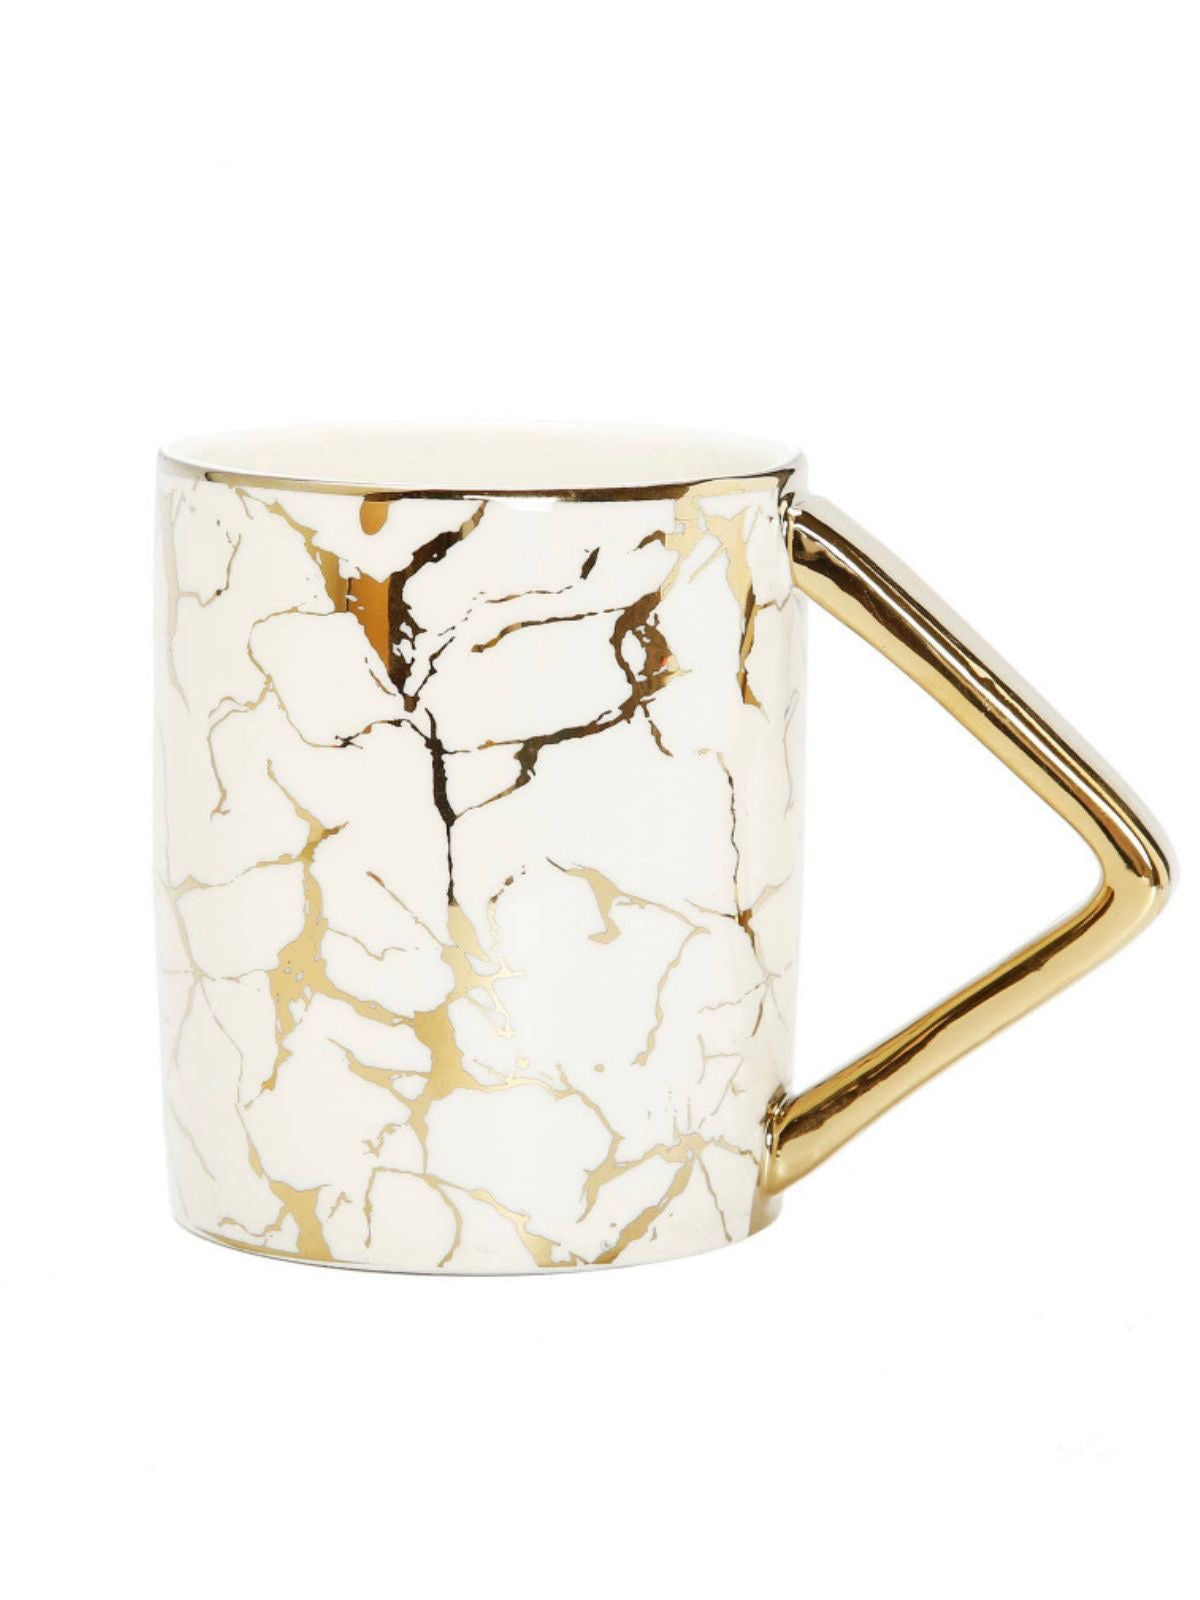 We love this angled gold handle on this gold marble look design mug and it is sure to become a favorite on your coffee station!